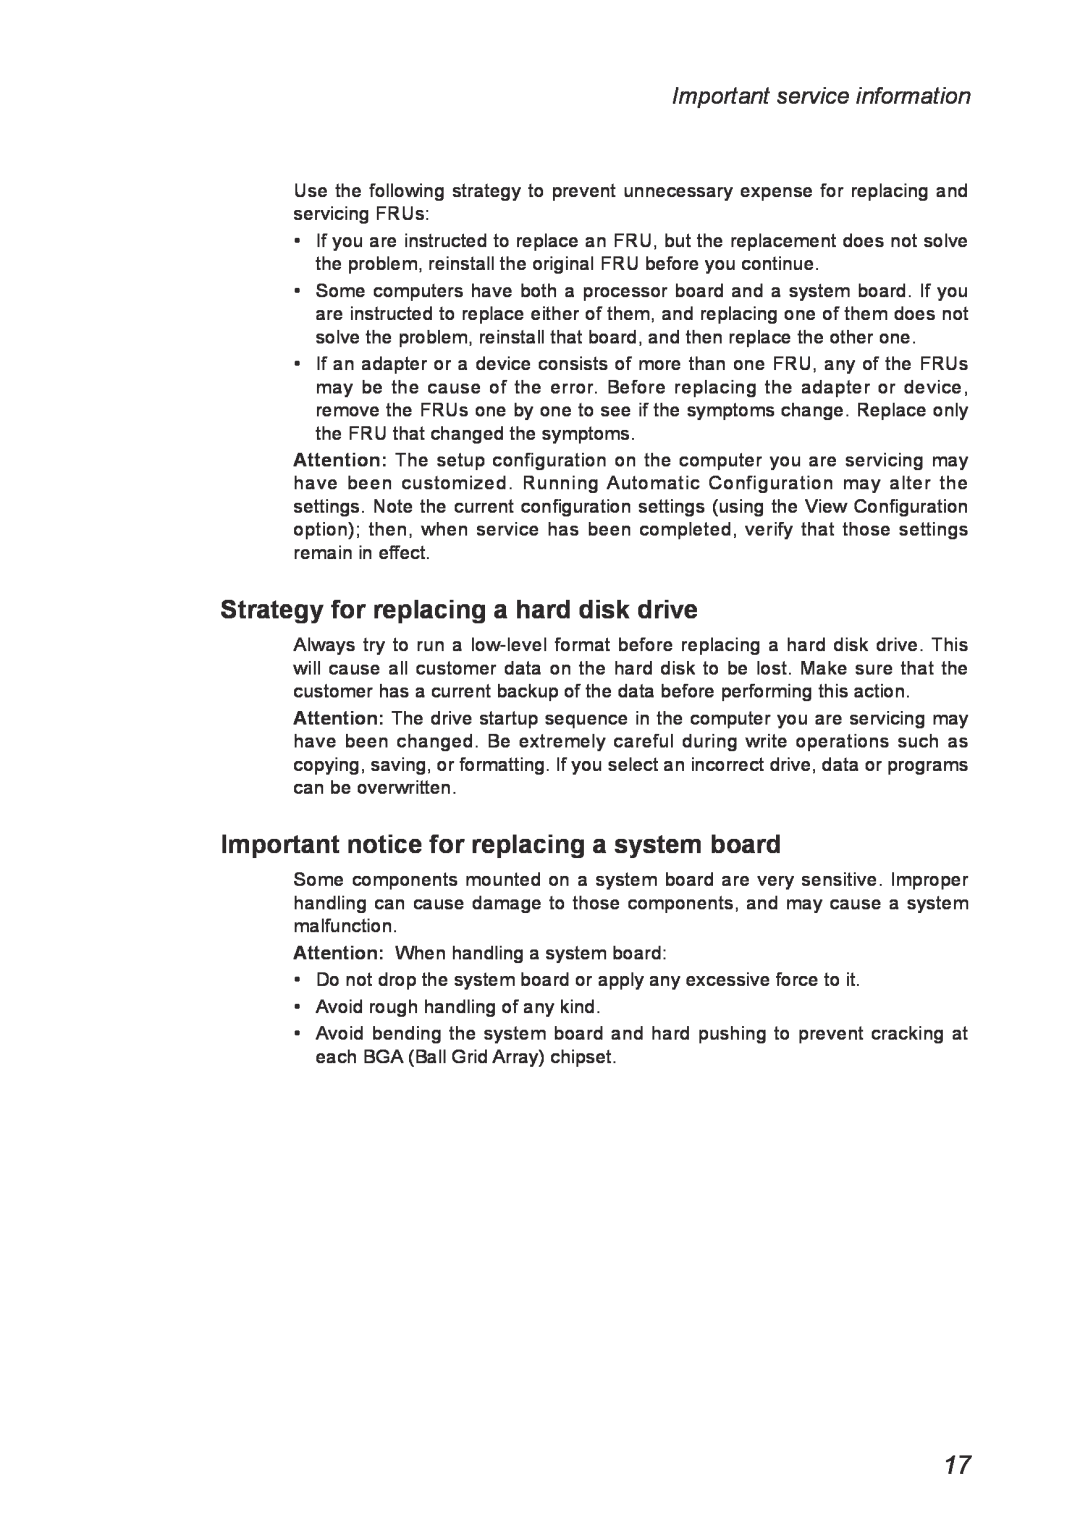 Lenovo U300S, U400 manual Strategy for replacing a hard disk drive, Important notice for replacing a system board 